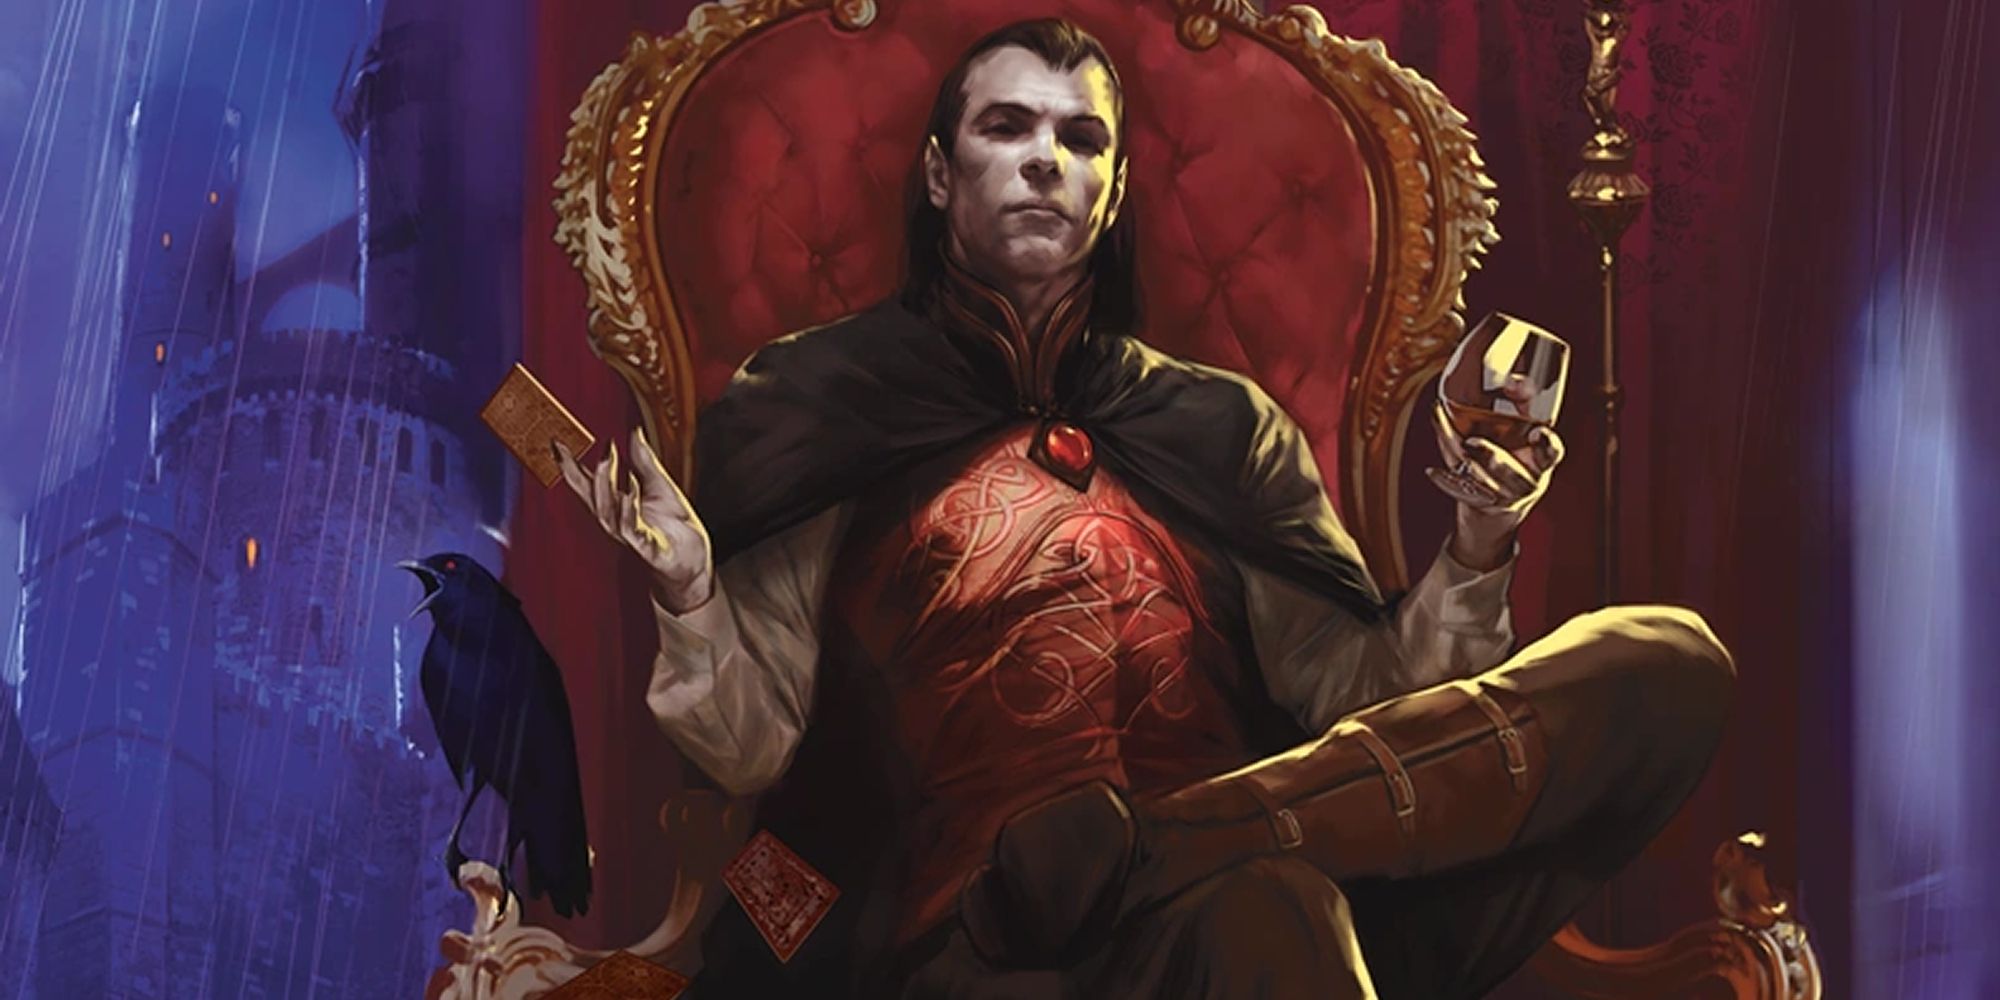 D&D Strahd Sitting On His Throne while holding a glass and a card in his hand while a crow caws off to his left side